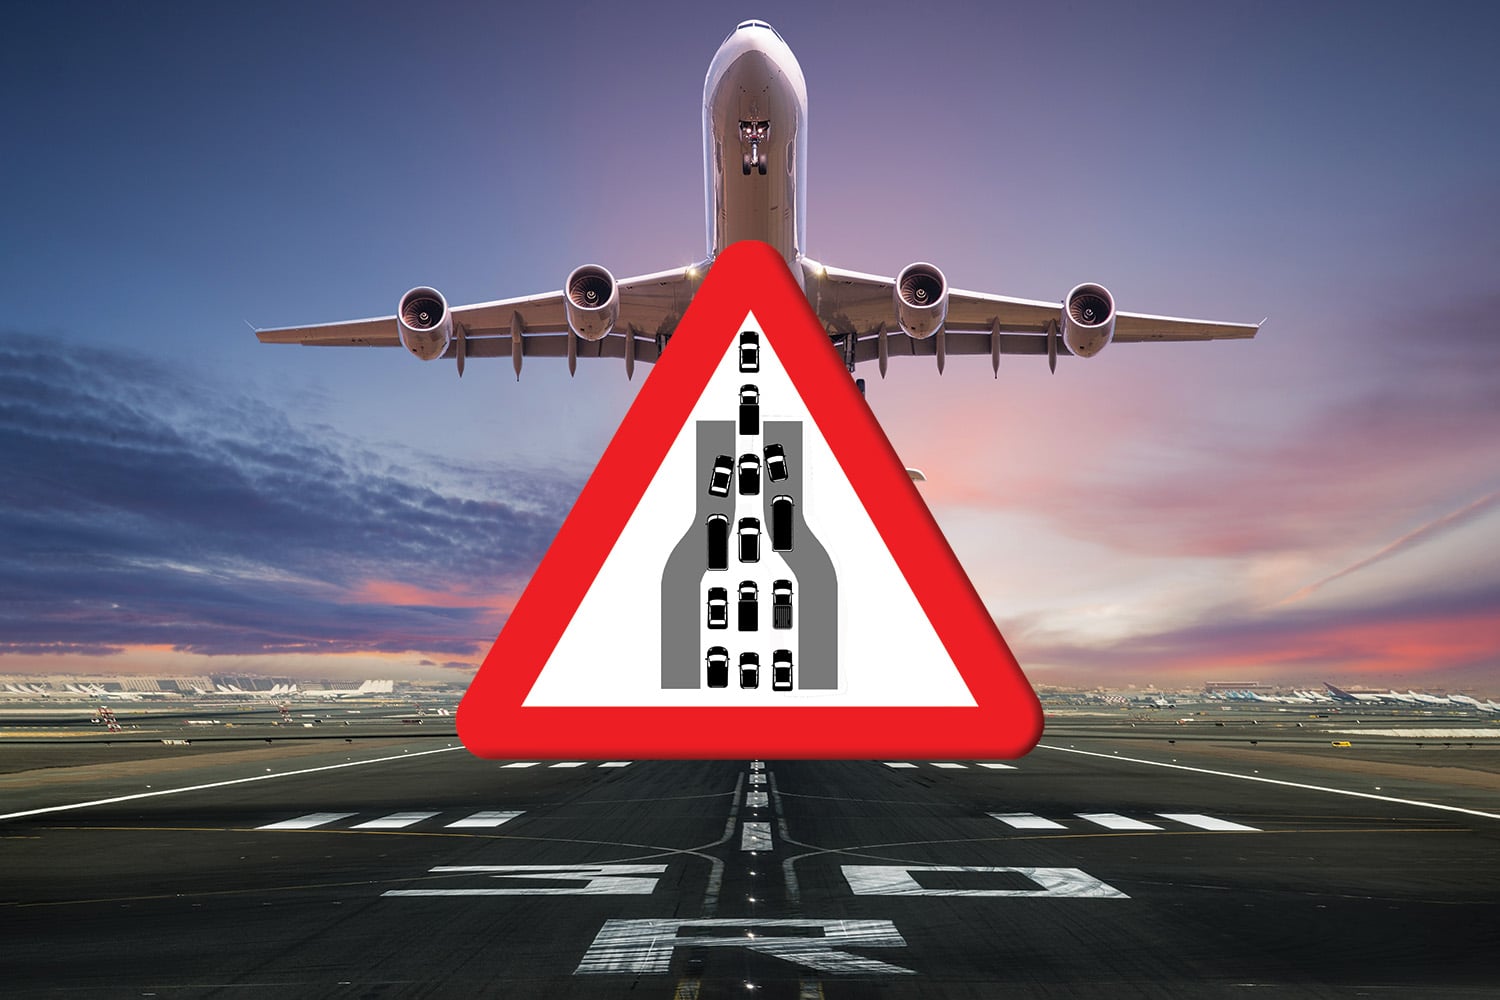 sign of a bottleneck ahead in front of a photo of an airplane taking off.